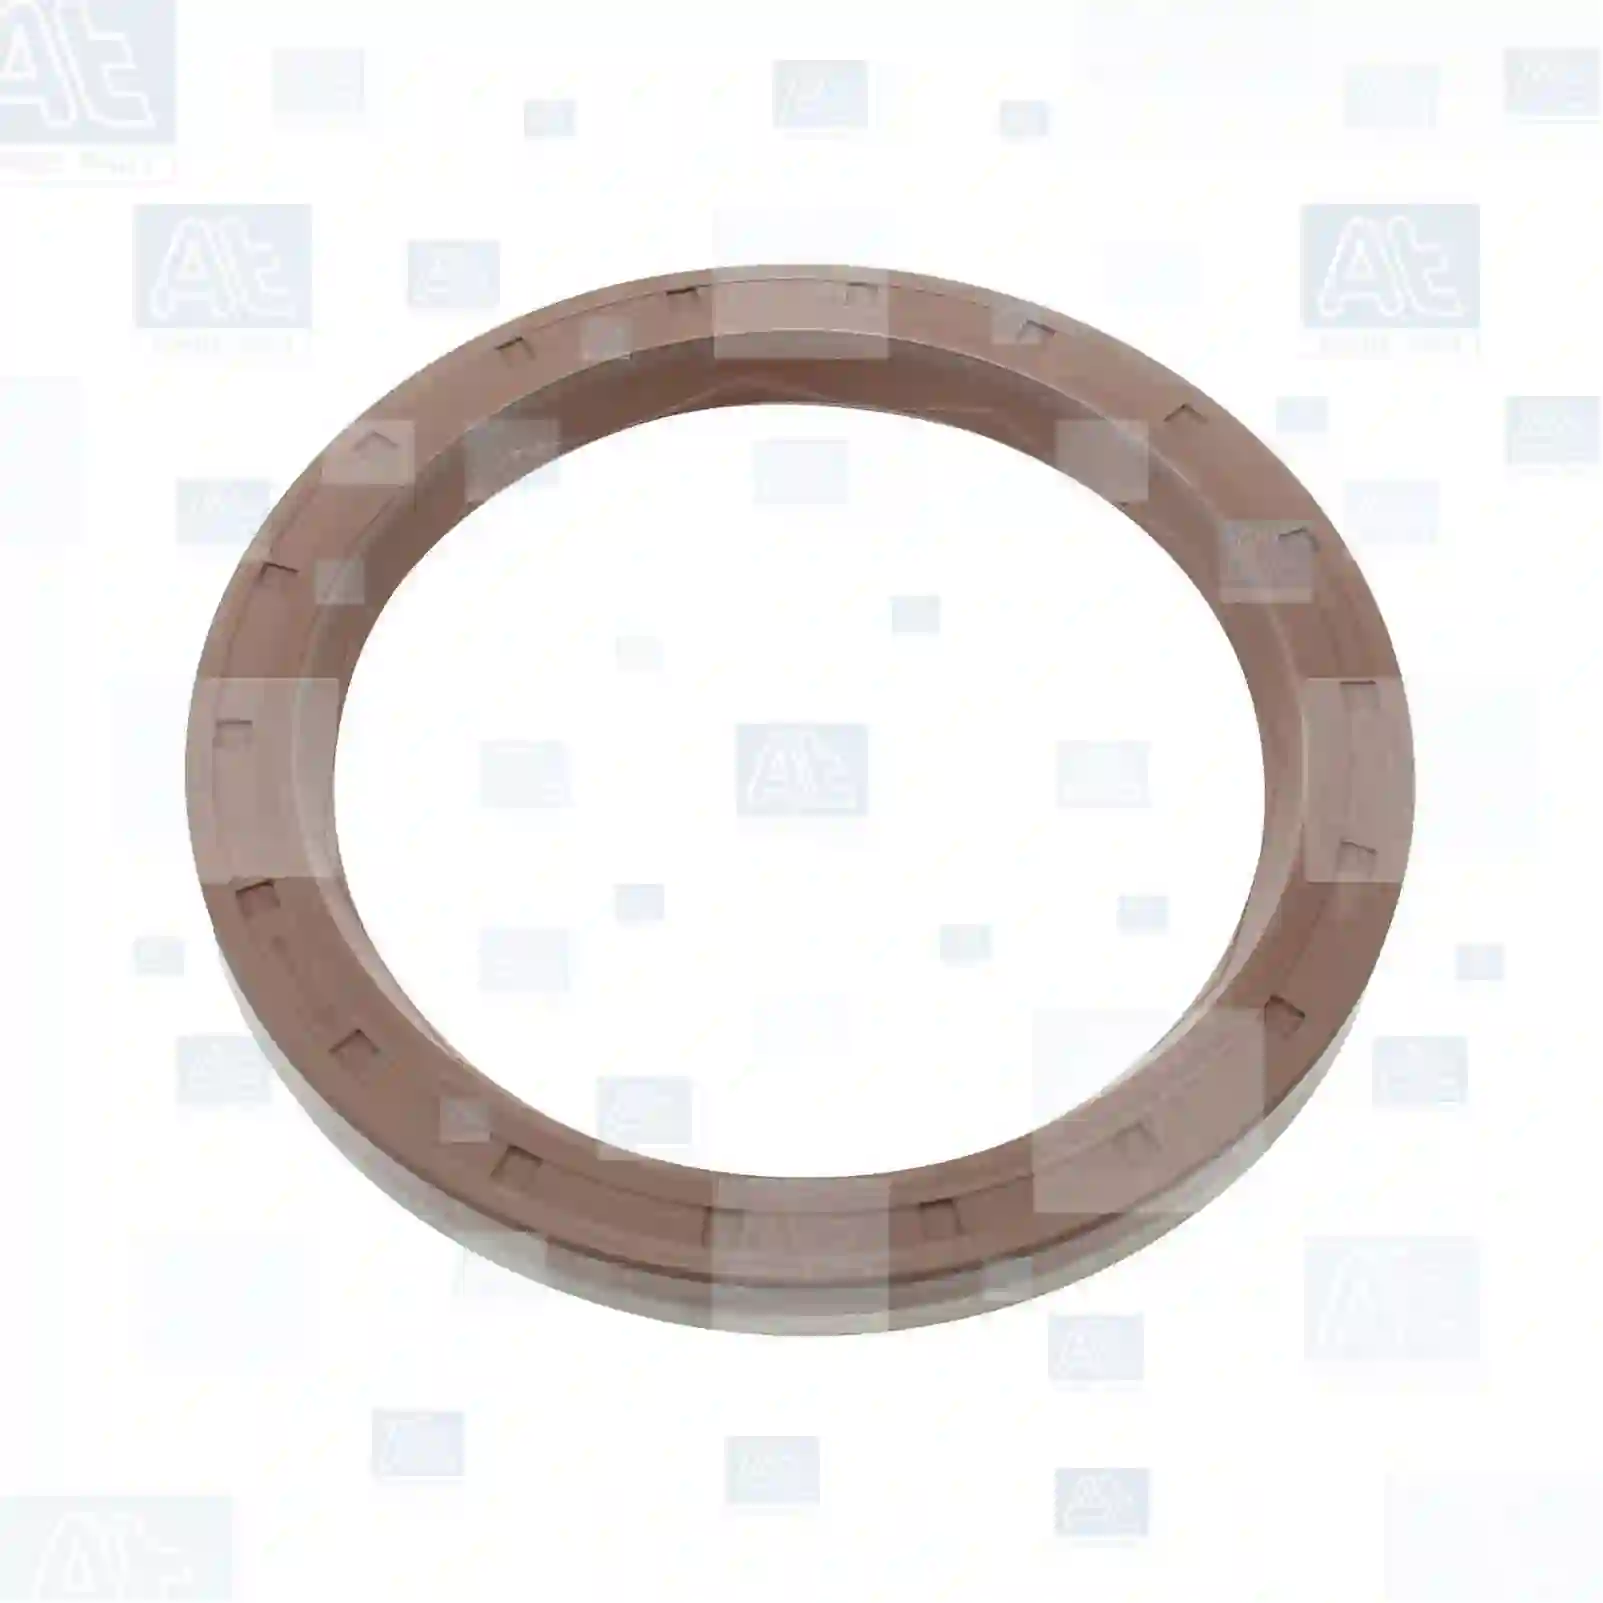 Oil seal, 77730318, 11141264431, 11141265431, 11141271081, 11141274346, 11141275466, 11141736932, ZC9612552U, 90487889, 1275466, 06562714015, 06562790214, 06562790215, 06562790331, 81965020245, 0059970947, 0059971147, 0059971947, 0079974747, 0079975147, 0099971446, 0109972847, 0109974247, 0149974346, 0179973147, 682269, ZC9612552U, LUF000010, 059103085A, 059103085B, 059103085E, ZG02704-0008 ||  77730318 At Spare Part | Engine, Accelerator Pedal, Camshaft, Connecting Rod, Crankcase, Crankshaft, Cylinder Head, Engine Suspension Mountings, Exhaust Manifold, Exhaust Gas Recirculation, Filter Kits, Flywheel Housing, General Overhaul Kits, Engine, Intake Manifold, Oil Cleaner, Oil Cooler, Oil Filter, Oil Pump, Oil Sump, Piston & Liner, Sensor & Switch, Timing Case, Turbocharger, Cooling System, Belt Tensioner, Coolant Filter, Coolant Pipe, Corrosion Prevention Agent, Drive, Expansion Tank, Fan, Intercooler, Monitors & Gauges, Radiator, Thermostat, V-Belt / Timing belt, Water Pump, Fuel System, Electronical Injector Unit, Feed Pump, Fuel Filter, cpl., Fuel Gauge Sender,  Fuel Line, Fuel Pump, Fuel Tank, Injection Line Kit, Injection Pump, Exhaust System, Clutch & Pedal, Gearbox, Propeller Shaft, Axles, Brake System, Hubs & Wheels, Suspension, Leaf Spring, Universal Parts / Accessories, Steering, Electrical System, Cabin Oil seal, 77730318, 11141264431, 11141265431, 11141271081, 11141274346, 11141275466, 11141736932, ZC9612552U, 90487889, 1275466, 06562714015, 06562790214, 06562790215, 06562790331, 81965020245, 0059970947, 0059971147, 0059971947, 0079974747, 0079975147, 0099971446, 0109972847, 0109974247, 0149974346, 0179973147, 682269, ZC9612552U, LUF000010, 059103085A, 059103085B, 059103085E, ZG02704-0008 ||  77730318 At Spare Part | Engine, Accelerator Pedal, Camshaft, Connecting Rod, Crankcase, Crankshaft, Cylinder Head, Engine Suspension Mountings, Exhaust Manifold, Exhaust Gas Recirculation, Filter Kits, Flywheel Housing, General Overhaul Kits, Engine, Intake Manifold, Oil Cleaner, Oil Cooler, Oil Filter, Oil Pump, Oil Sump, Piston & Liner, Sensor & Switch, Timing Case, Turbocharger, Cooling System, Belt Tensioner, Coolant Filter, Coolant Pipe, Corrosion Prevention Agent, Drive, Expansion Tank, Fan, Intercooler, Monitors & Gauges, Radiator, Thermostat, V-Belt / Timing belt, Water Pump, Fuel System, Electronical Injector Unit, Feed Pump, Fuel Filter, cpl., Fuel Gauge Sender,  Fuel Line, Fuel Pump, Fuel Tank, Injection Line Kit, Injection Pump, Exhaust System, Clutch & Pedal, Gearbox, Propeller Shaft, Axles, Brake System, Hubs & Wheels, Suspension, Leaf Spring, Universal Parts / Accessories, Steering, Electrical System, Cabin